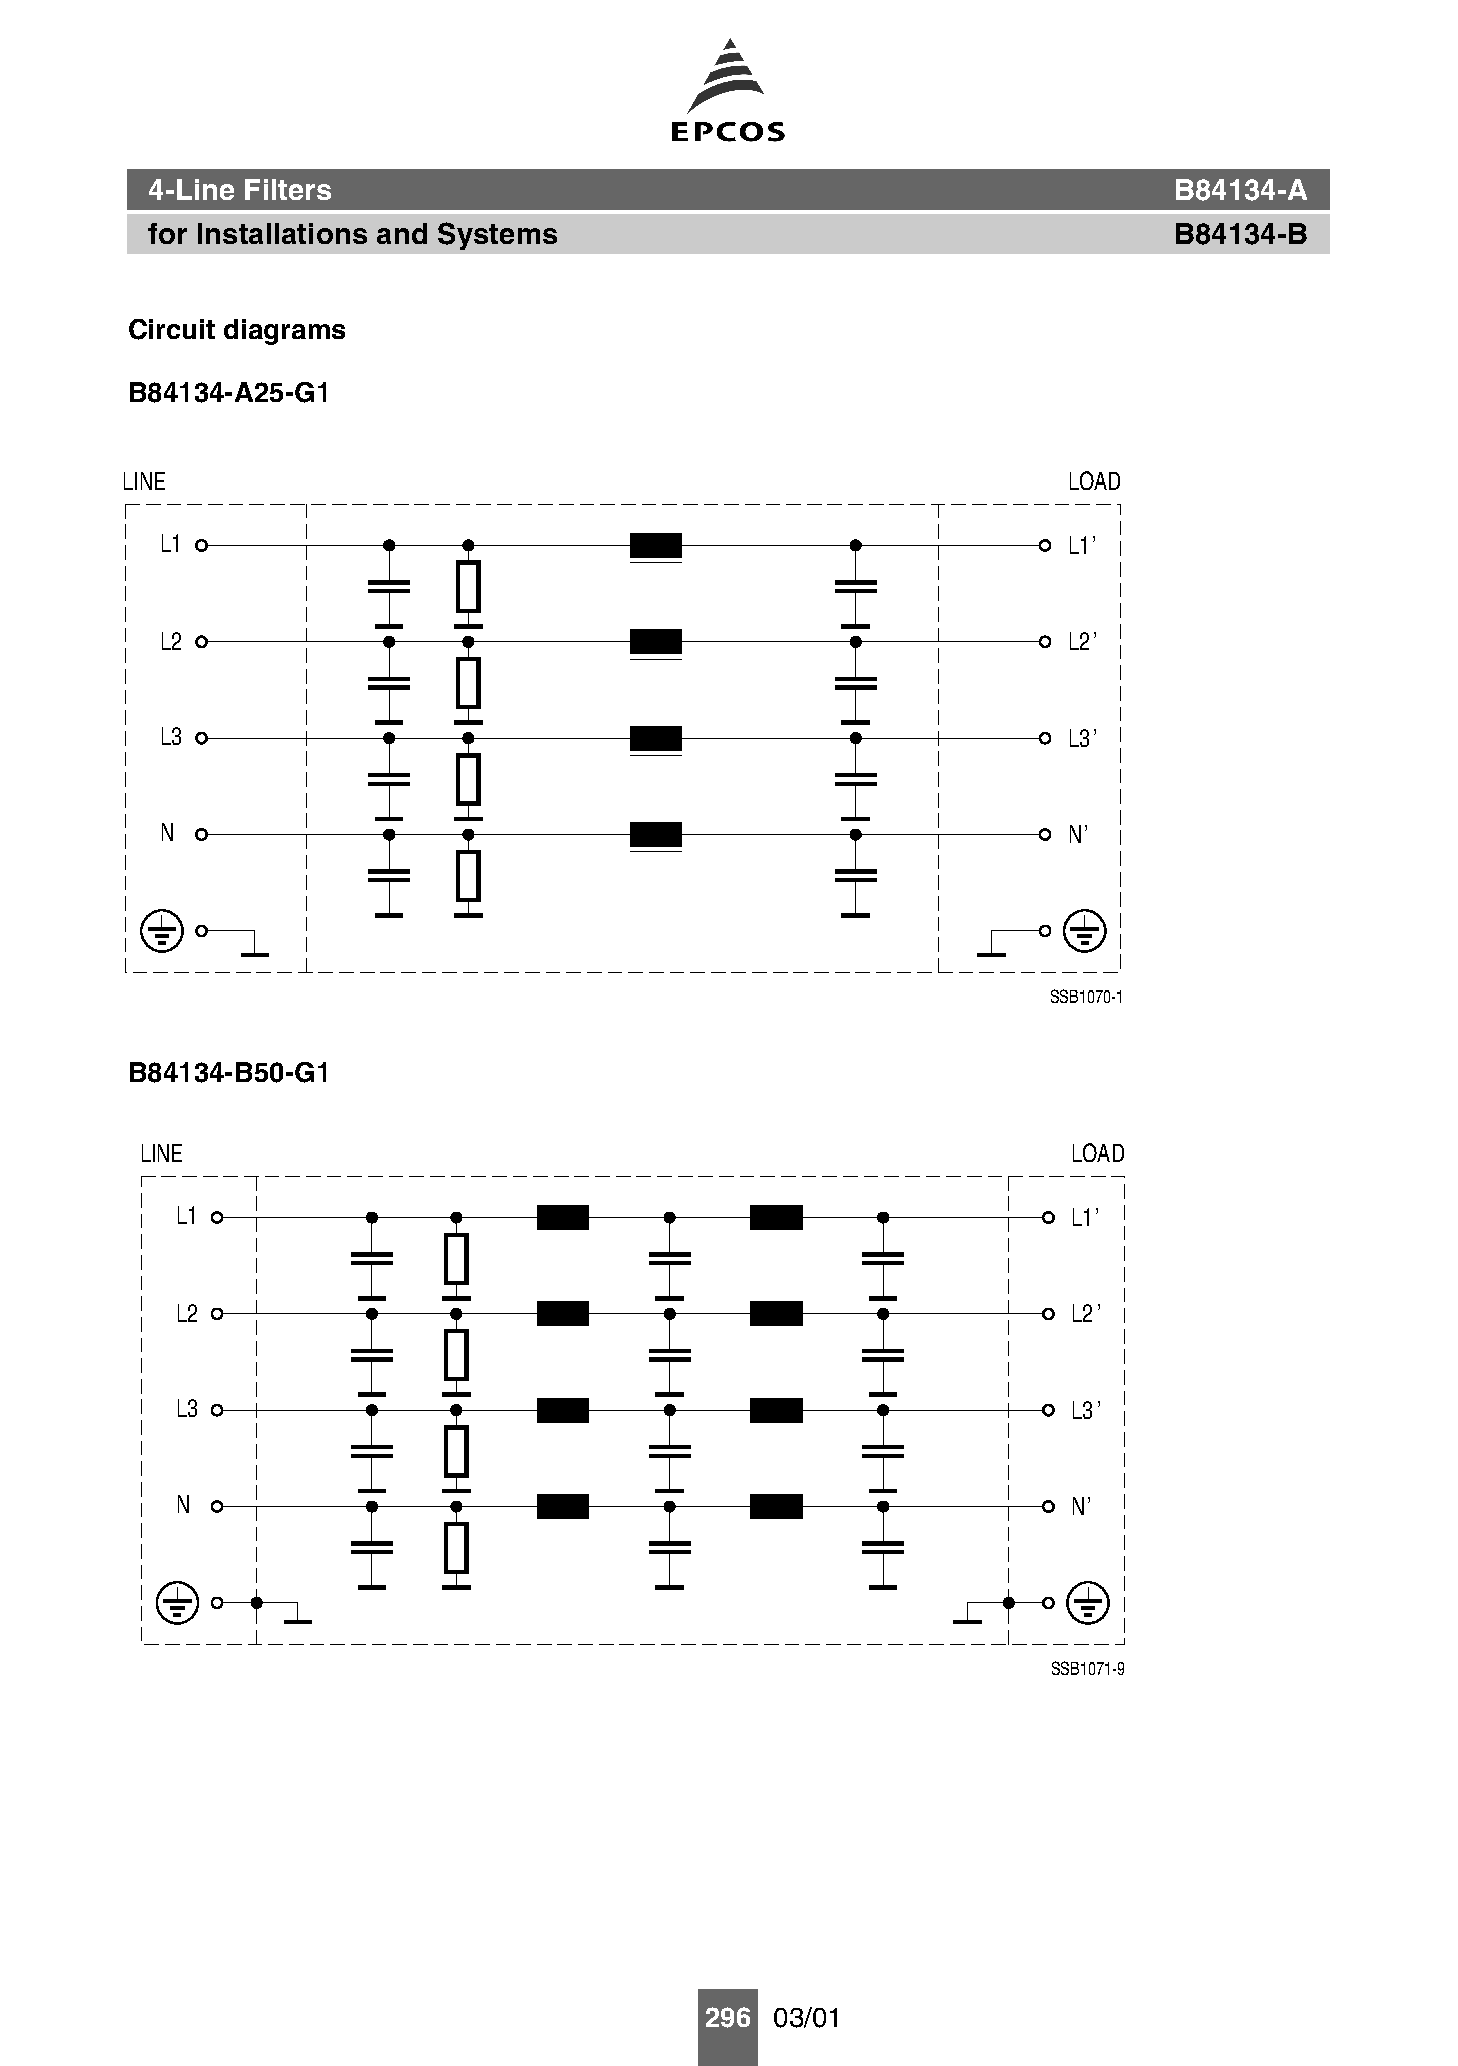 Datasheet B84134-A - 4-Line Filters page 2